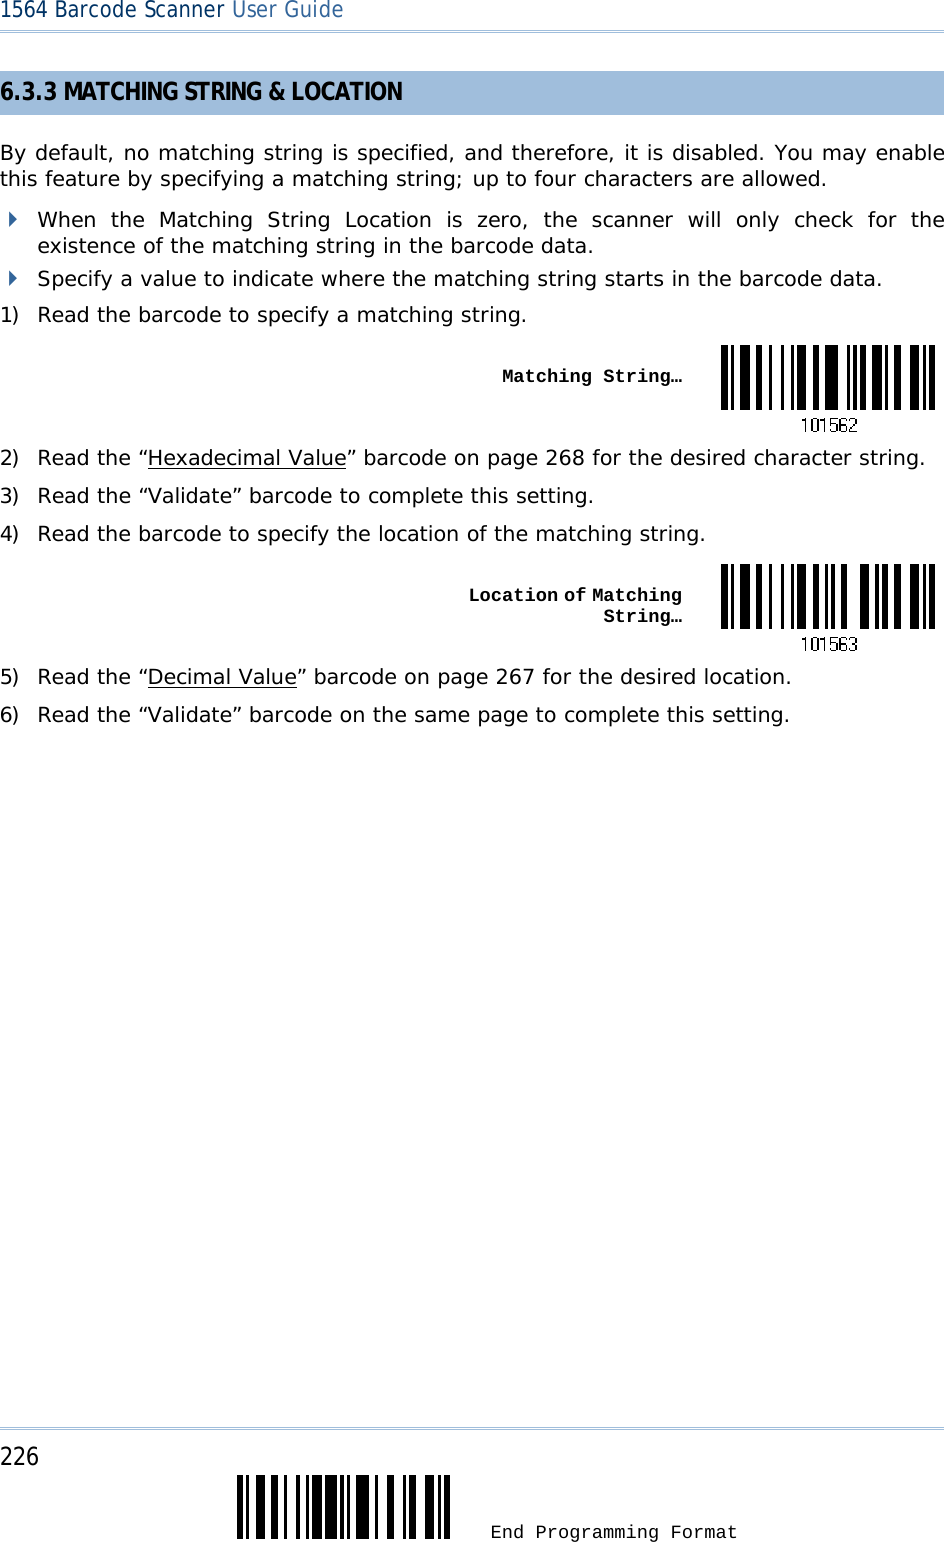 226  End Programming Format 1564 Barcode Scanner User Guide  6.3.3 MATCHING STRING &amp; LOCATION By default, no matching string is specified, and therefore, it is disabled. You may enable this feature by specifying a matching string; up to four characters are allowed.  When the Matching String Location is zero, the scanner will only check for the existence of the matching string in the barcode data.  Specify a value to indicate where the matching string starts in the barcode data. 1) Read the barcode to specify a matching string.  Matching String…2) Read the “Hexadecimal Value” barcode on page 268 for the desired character string.  3) Read the “Validate” barcode to complete this setting. 4) Read the barcode to specify the location of the matching string.  Location of Matching String…5) Read the “Decimal Value” barcode on page 267 for the desired location.  6) Read the “Validate” barcode on the same page to complete this setting.       